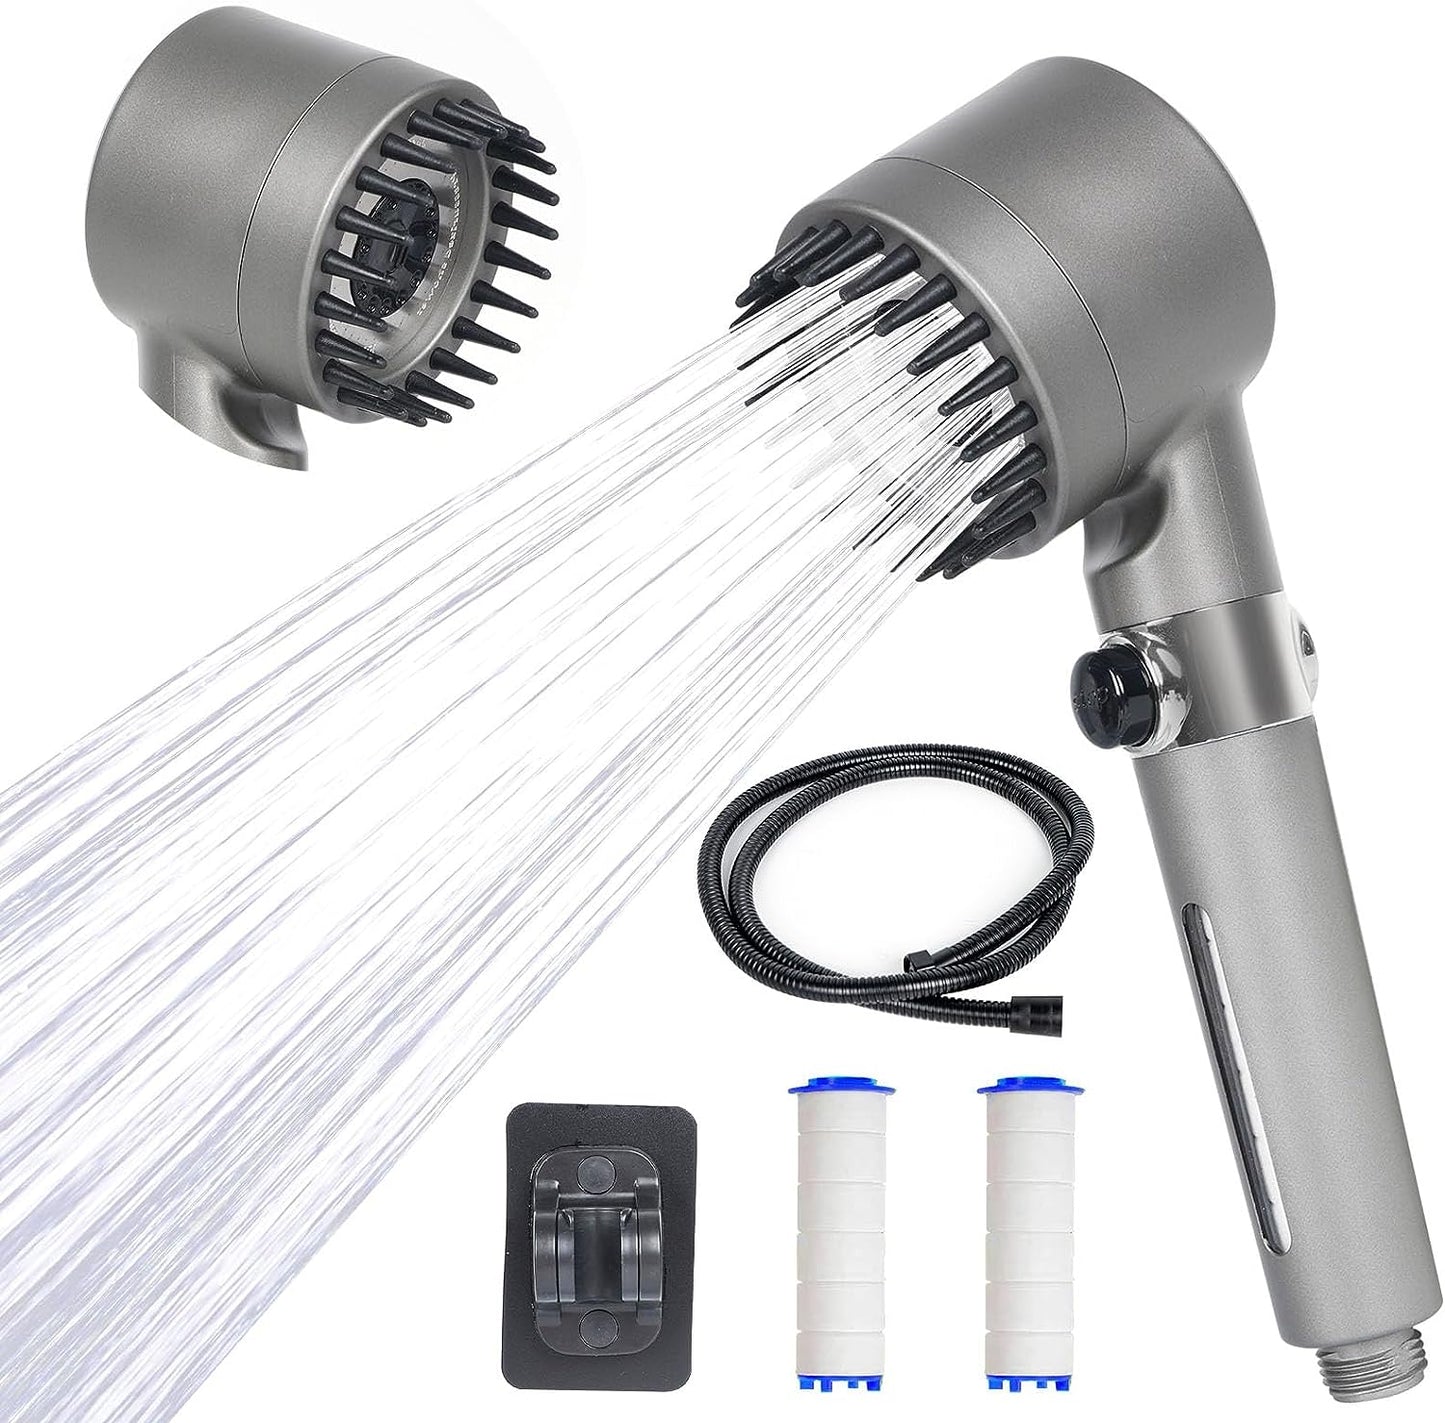 Shower Heads with Handheld Spray Combo,High Pressure Shower Heads,Shower Head Filters,3 Modes Filtered Shower Head with Hose 60'',Bracket,Rubber Washers,Apartment Must Haves